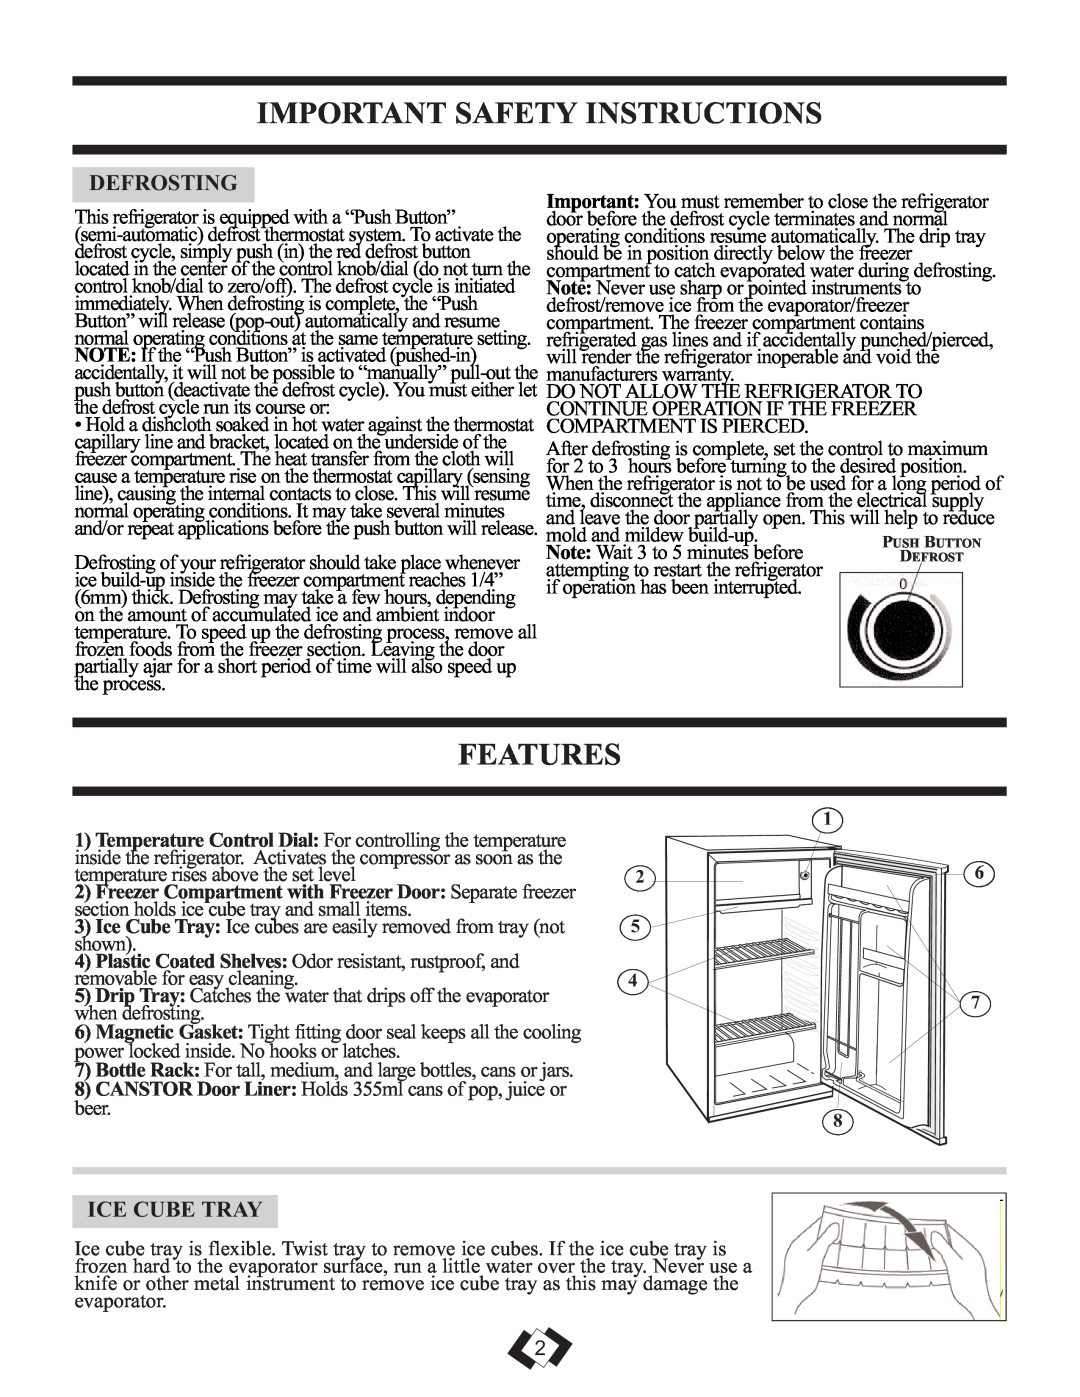 Sunbeam SBCR039W important safety instructions Features, Important Safety Instructions, Defrosting, Ice Cube Tray 